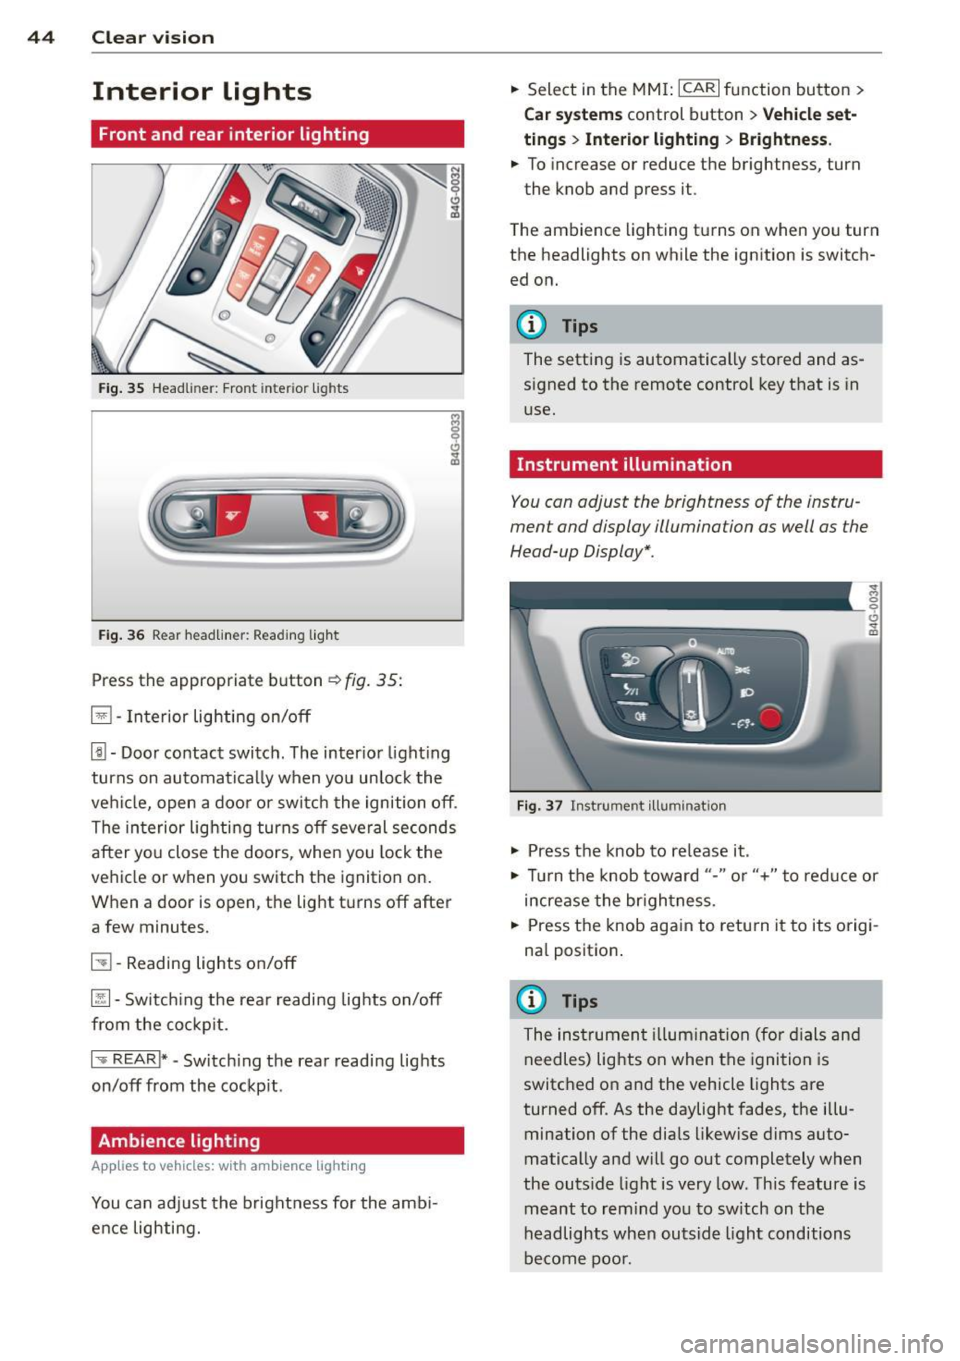 AUDI S7 2012 Service Manual 44  Clear vis ion 
Interior  lights 
Front  and  rear  interior lighting 
Fig. 35 Head liner:  Fron t  int eri or  ligh ts 
Fig. 36 Rear  headlin er: R ead in g  light 
Press  the  appropriate  b utto